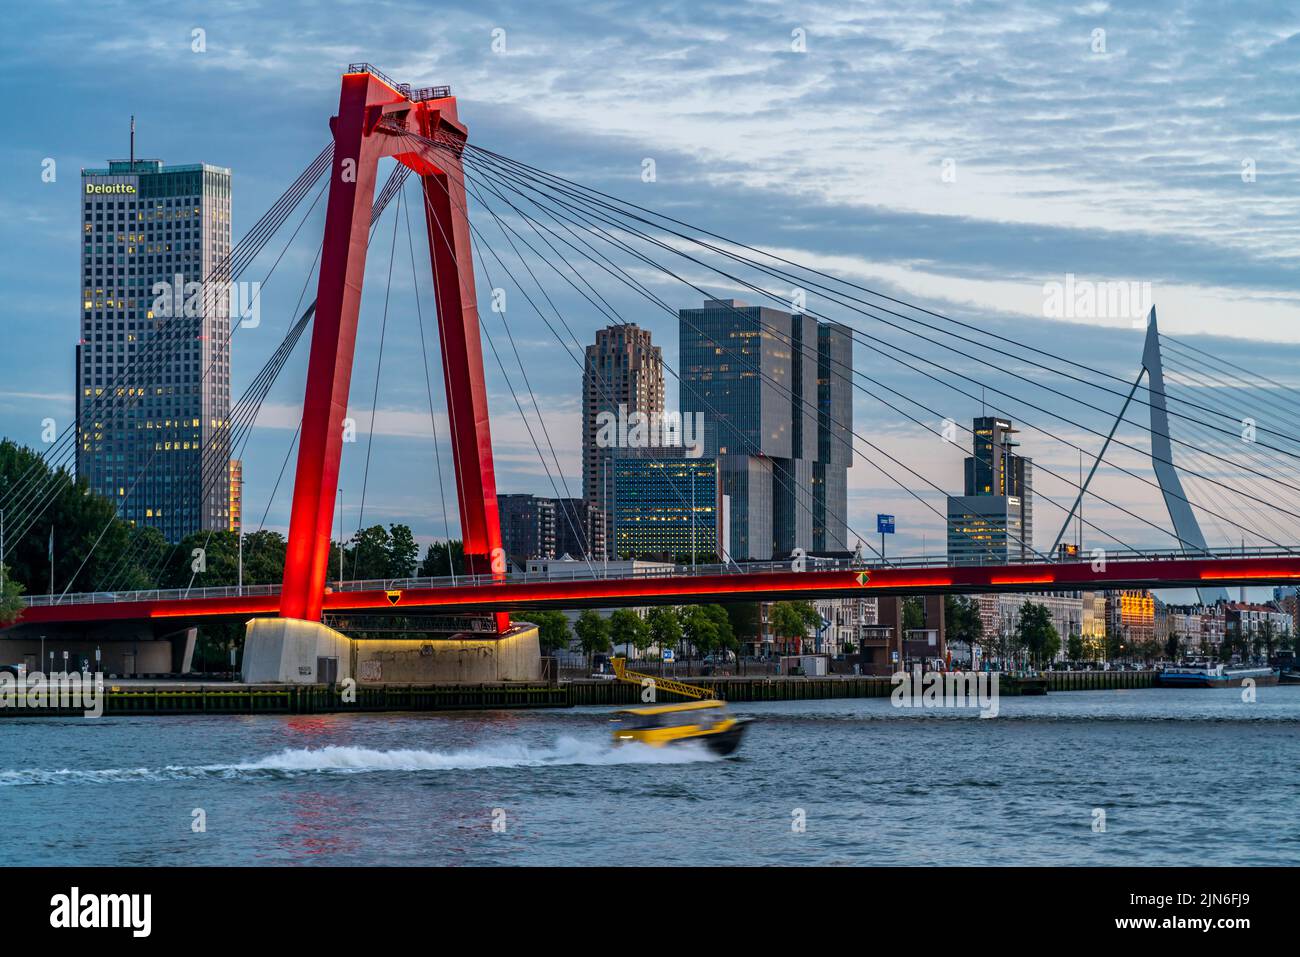 The skyline of Rotterdam, on the Nieuwe Maas, river, skyscrapers, buildings in the city, Netherlands, Willemsbrug, Erasmusbrug in the back, Stock Photo